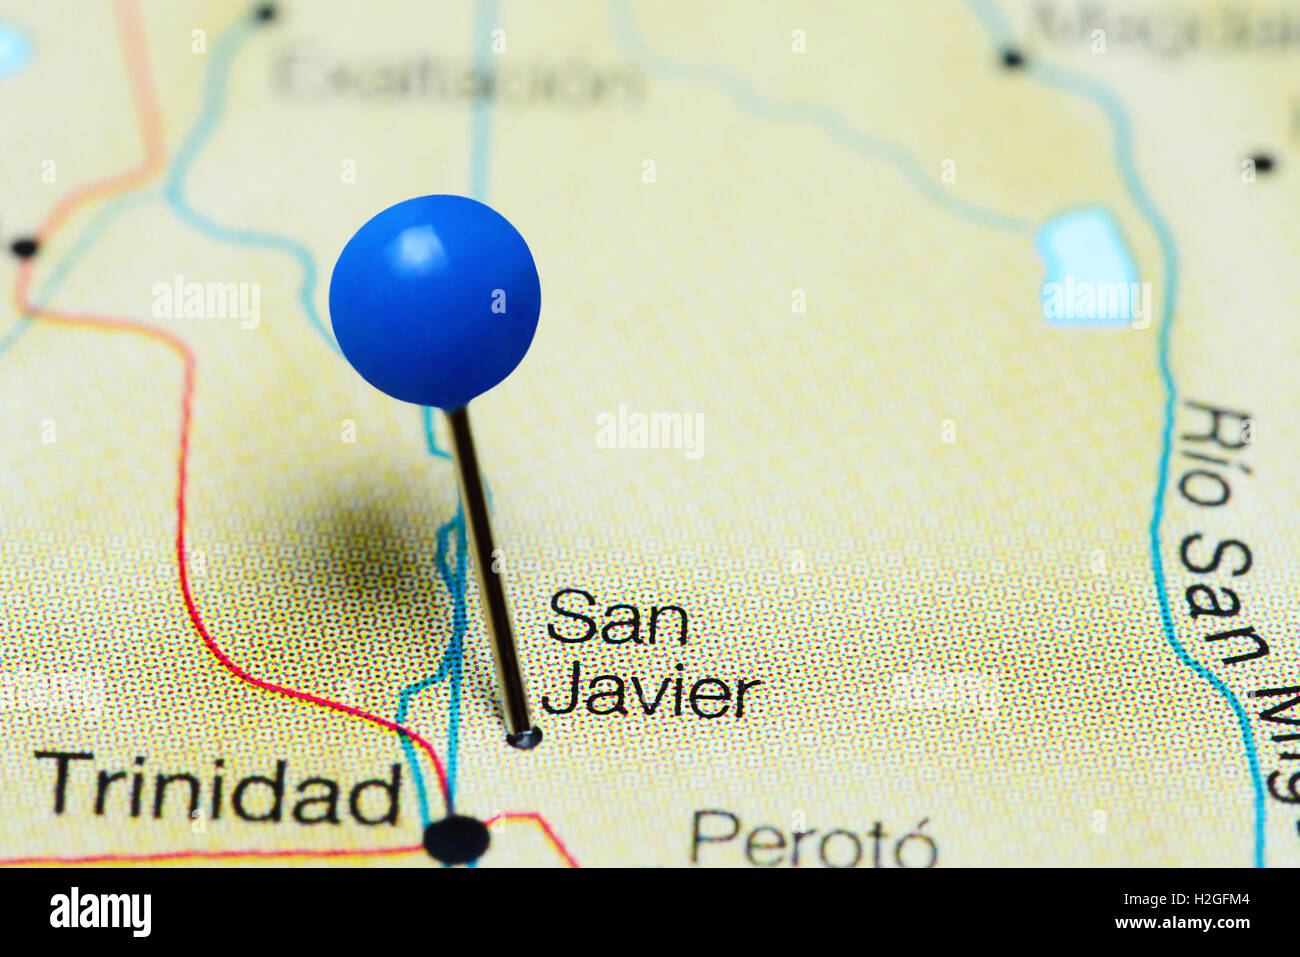 San Javier pinned on a map of Bolivia Stock Photo